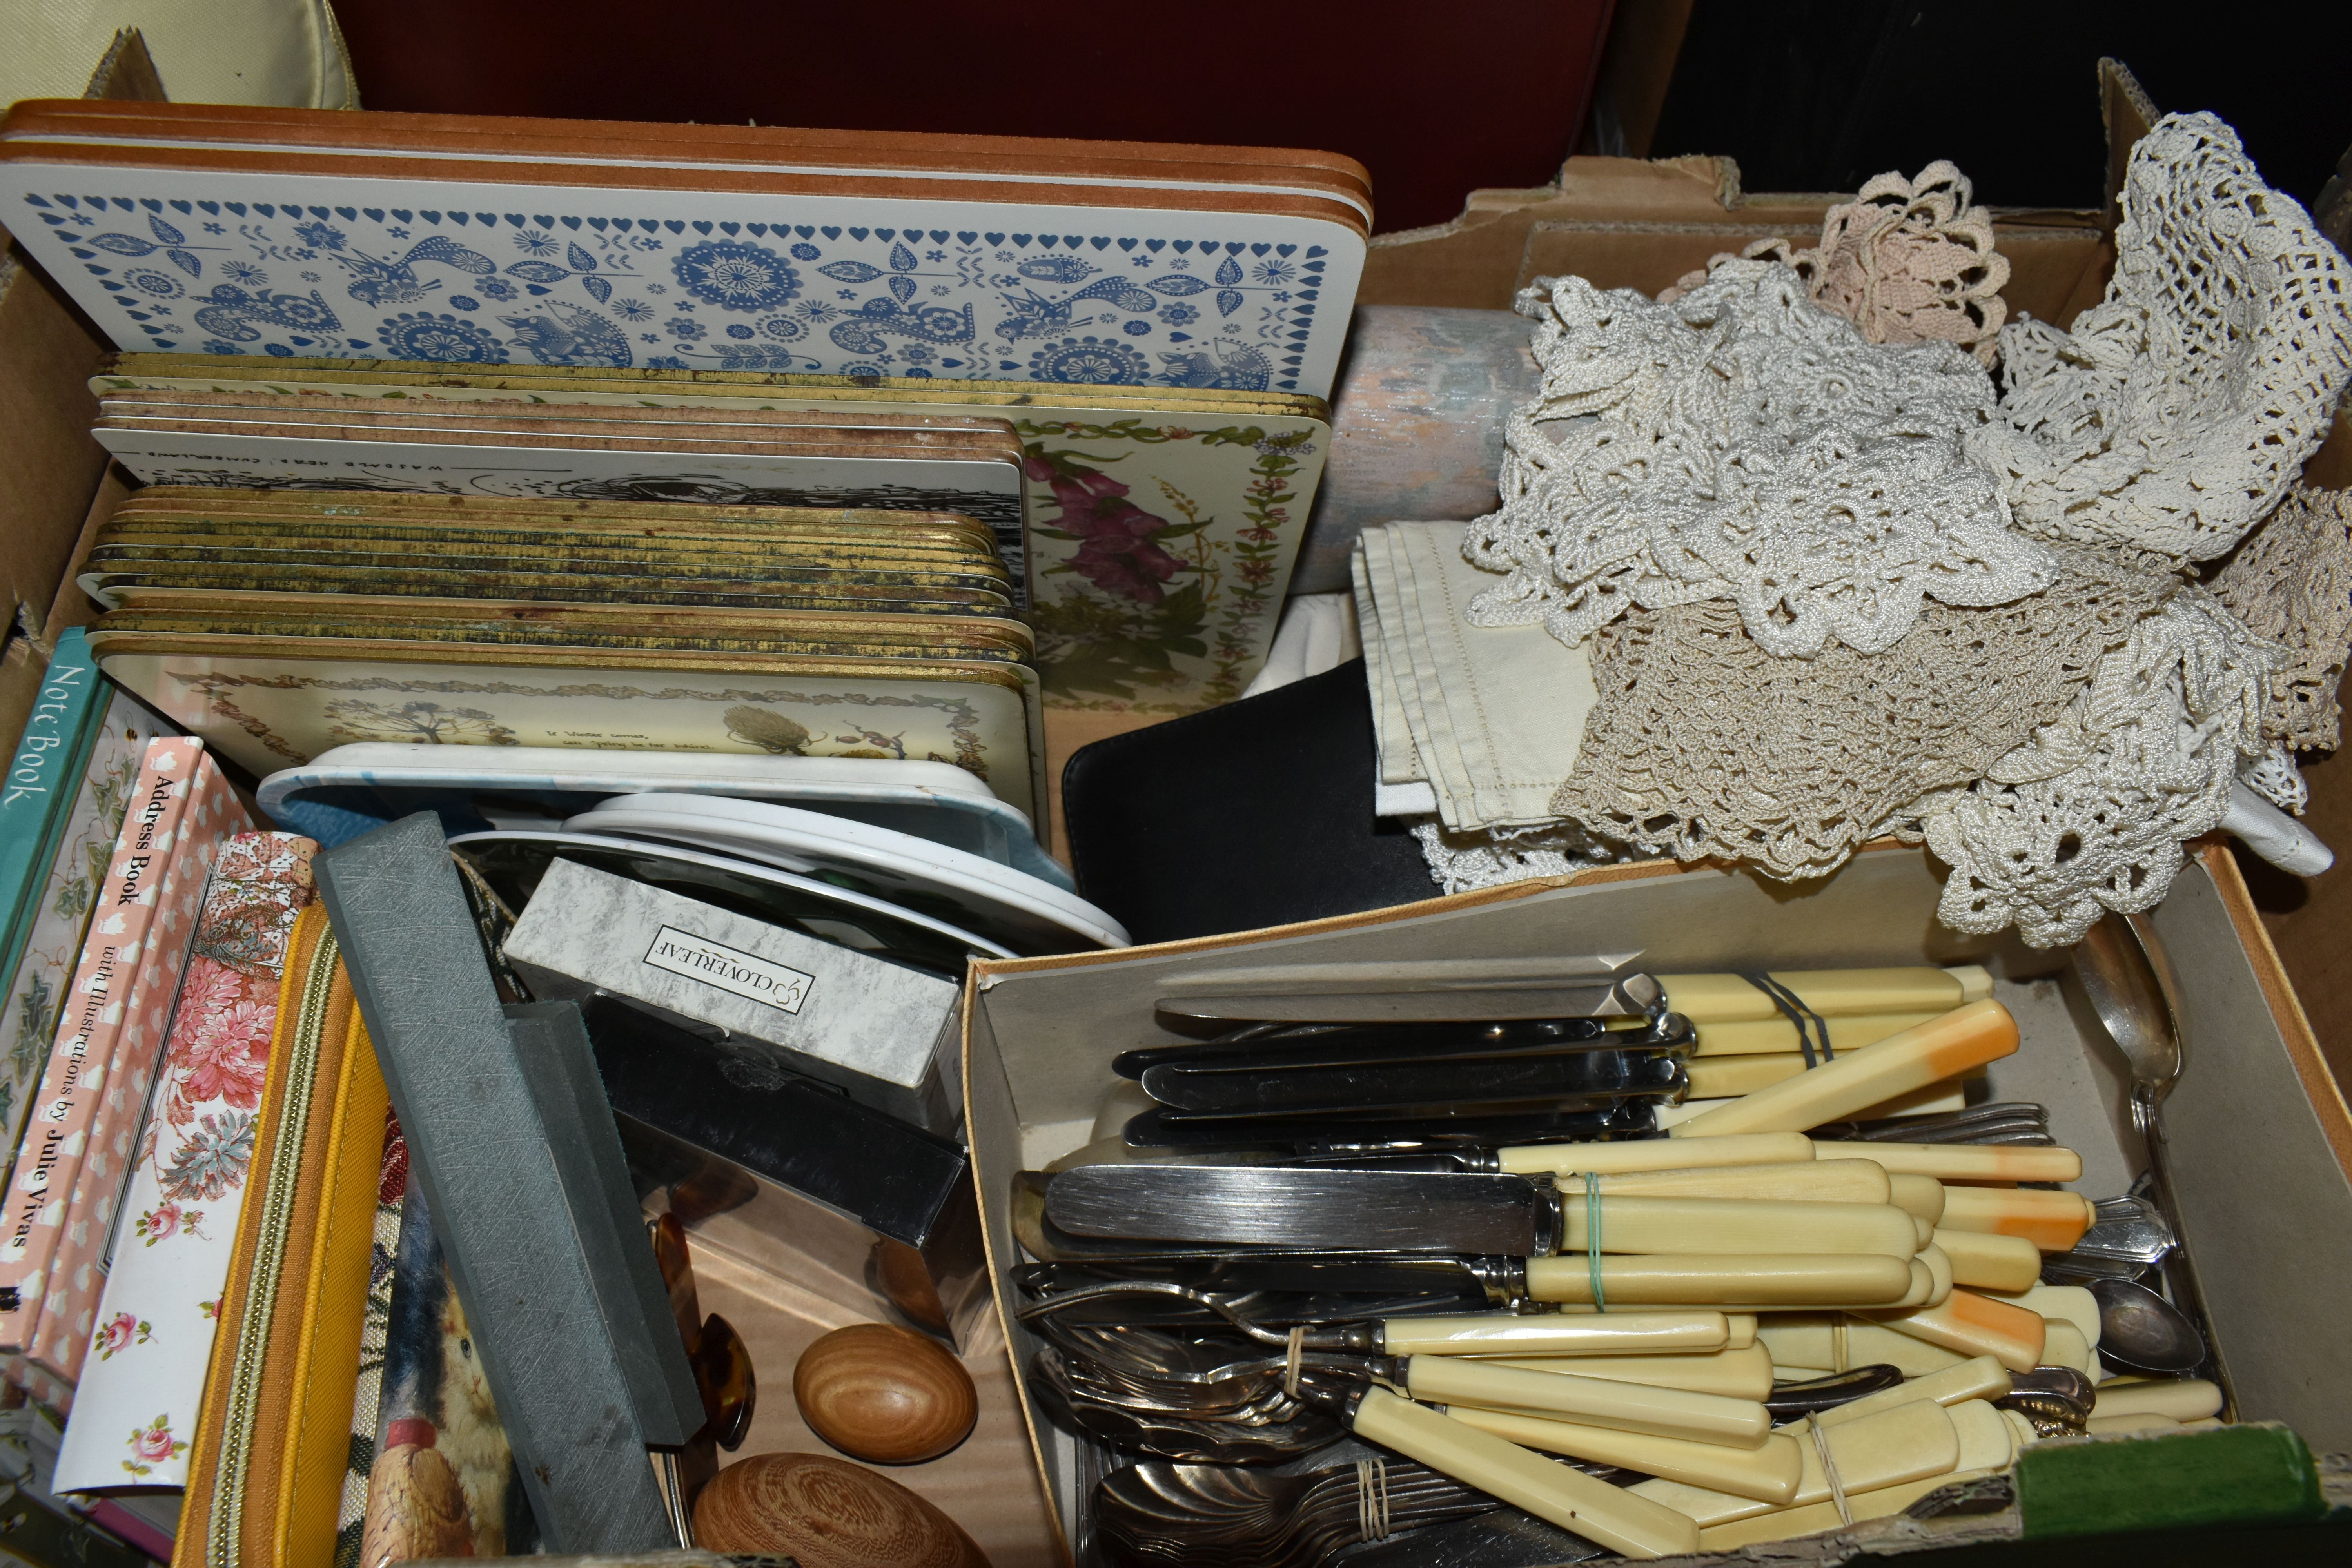 FOUR BOXES OF BOOKS AND MISCELLANEOUS SUNDRIES, to include two walking sticks, onyx candle holder, a - Image 6 of 6